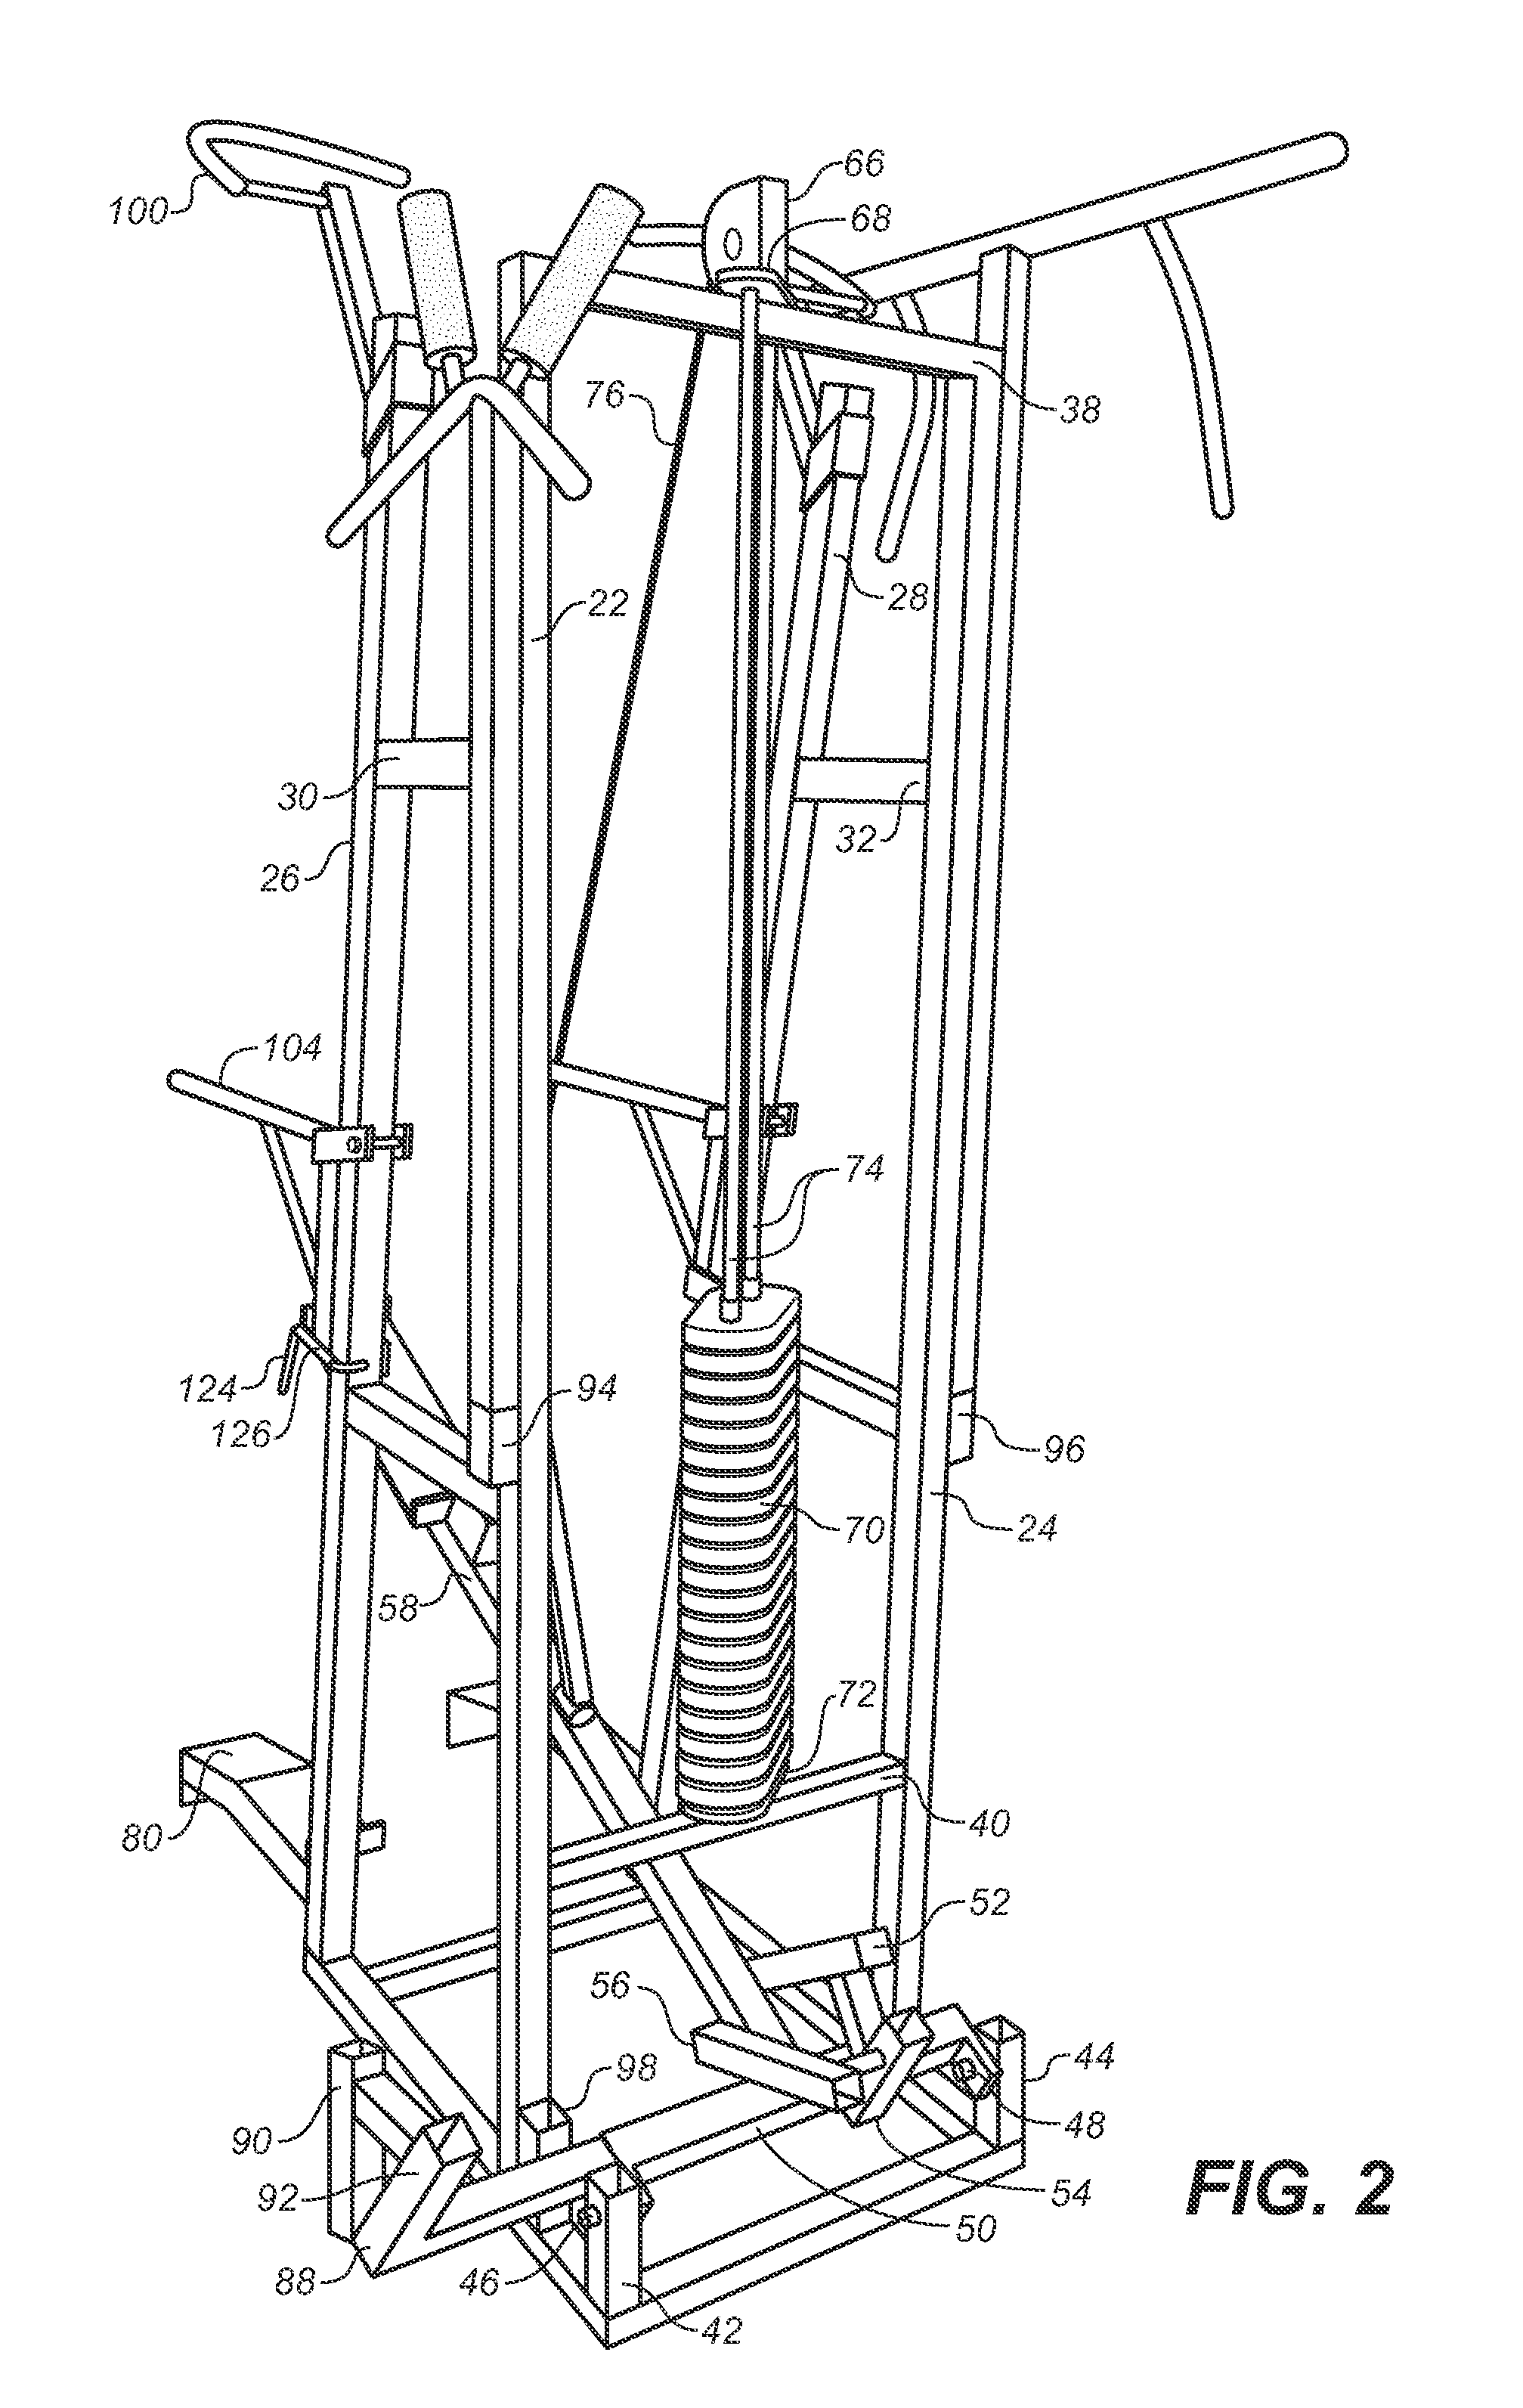 Multistation exercise apparatus